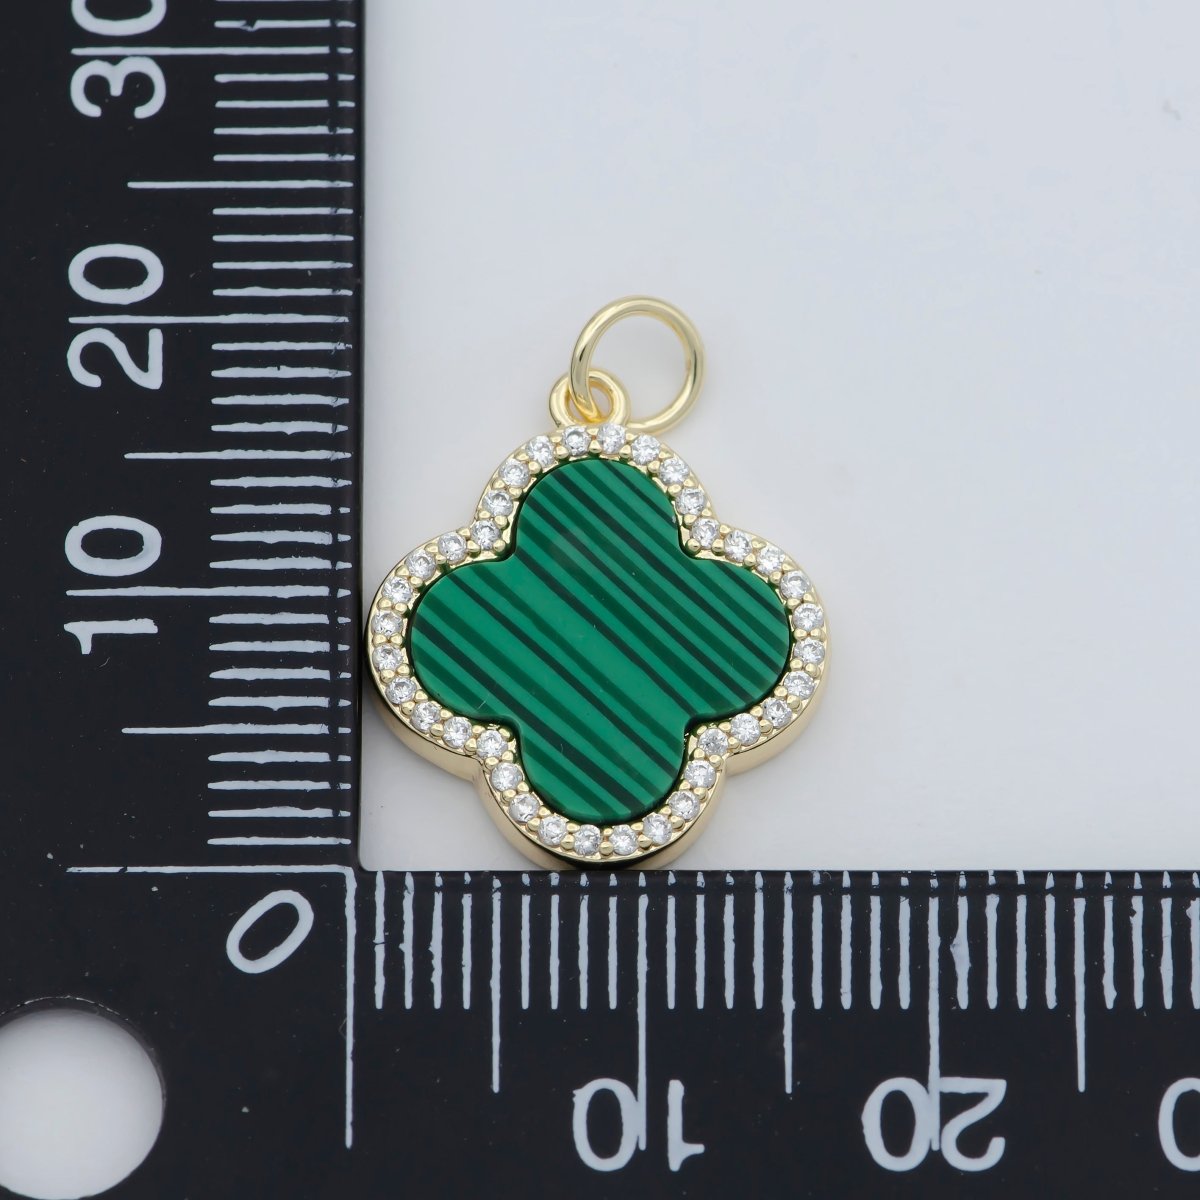 Natural Gemstone charm Malachite Clover pendant, Gold Filled Charm Semi Previous Stone with Gold Filled Bezel for Earring necklace Bracelet M-369 - DLUXCA